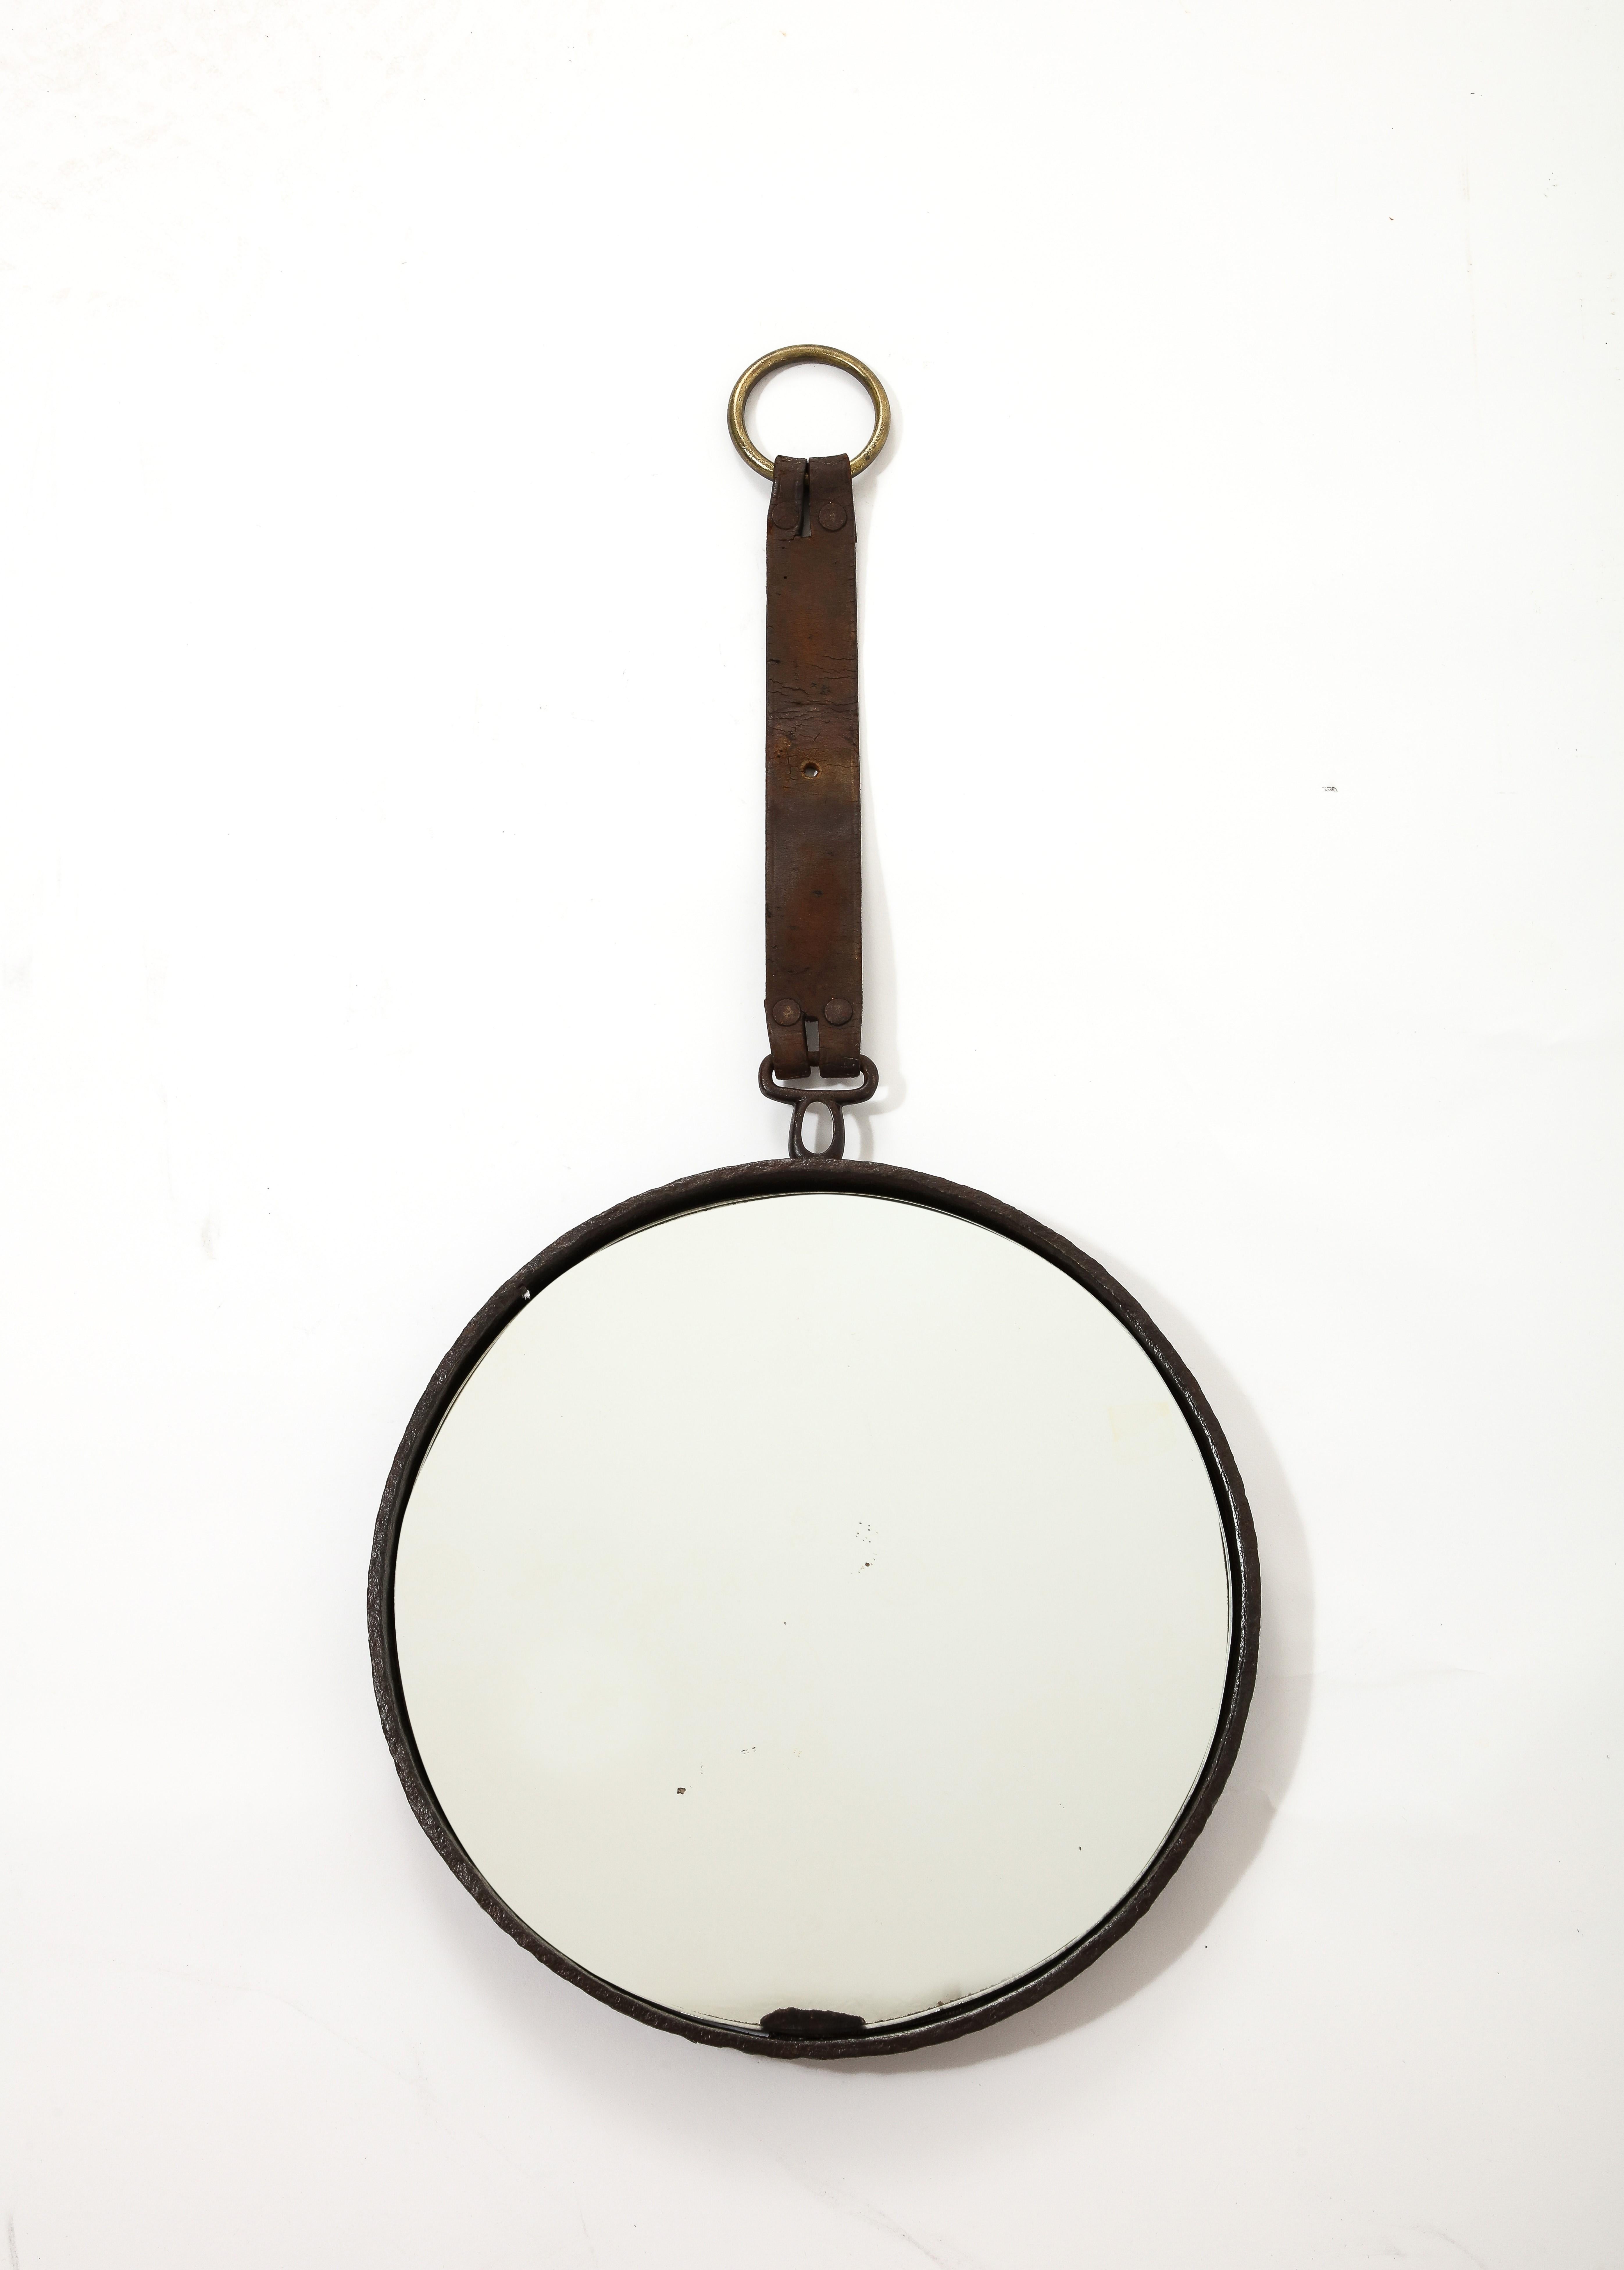 Brutalist cast iron mirror with a deep brown leather strap and a brass finishing ring. In fair vintage condition. Markings and wear on leather strap. Oxydation on the mirror especially in one specific area close to the rim.
 